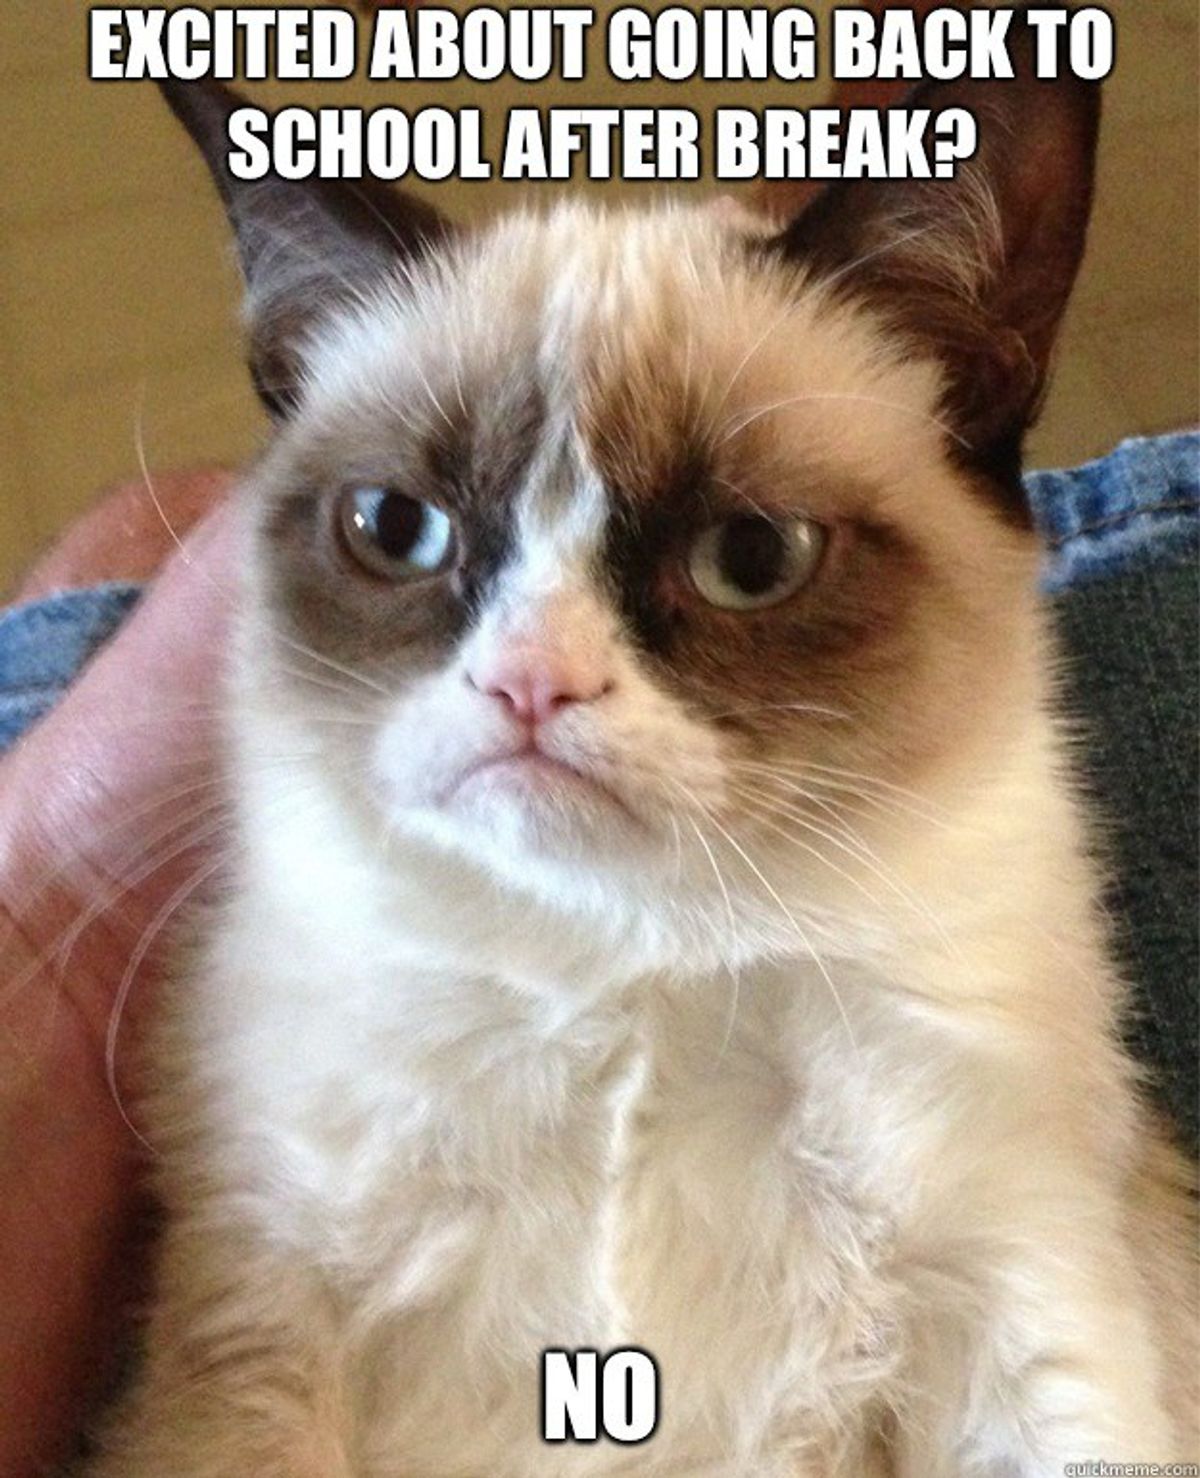 25 Thoughts You Have When Returning To School After Break